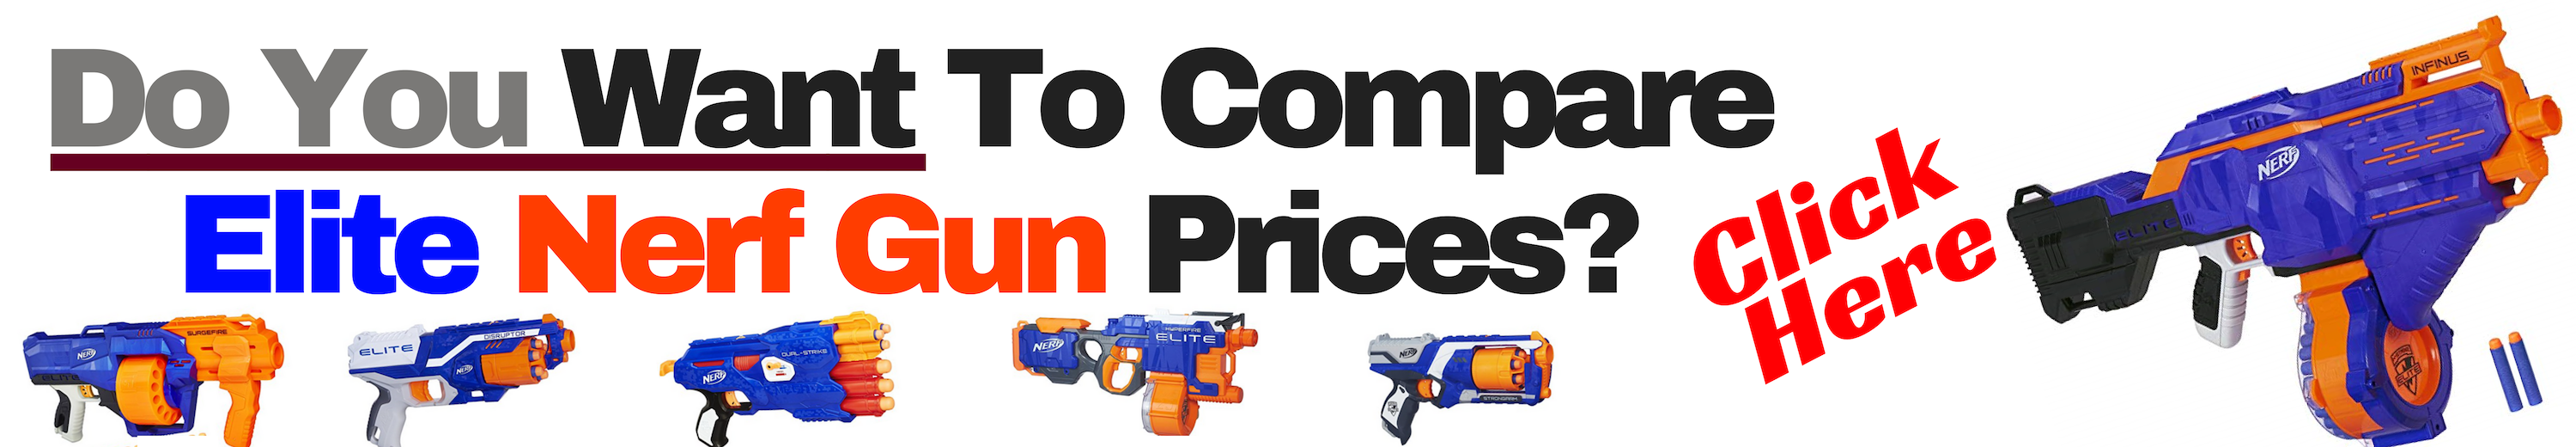 Do You Want To Compare Elite Nerf Gun Prices